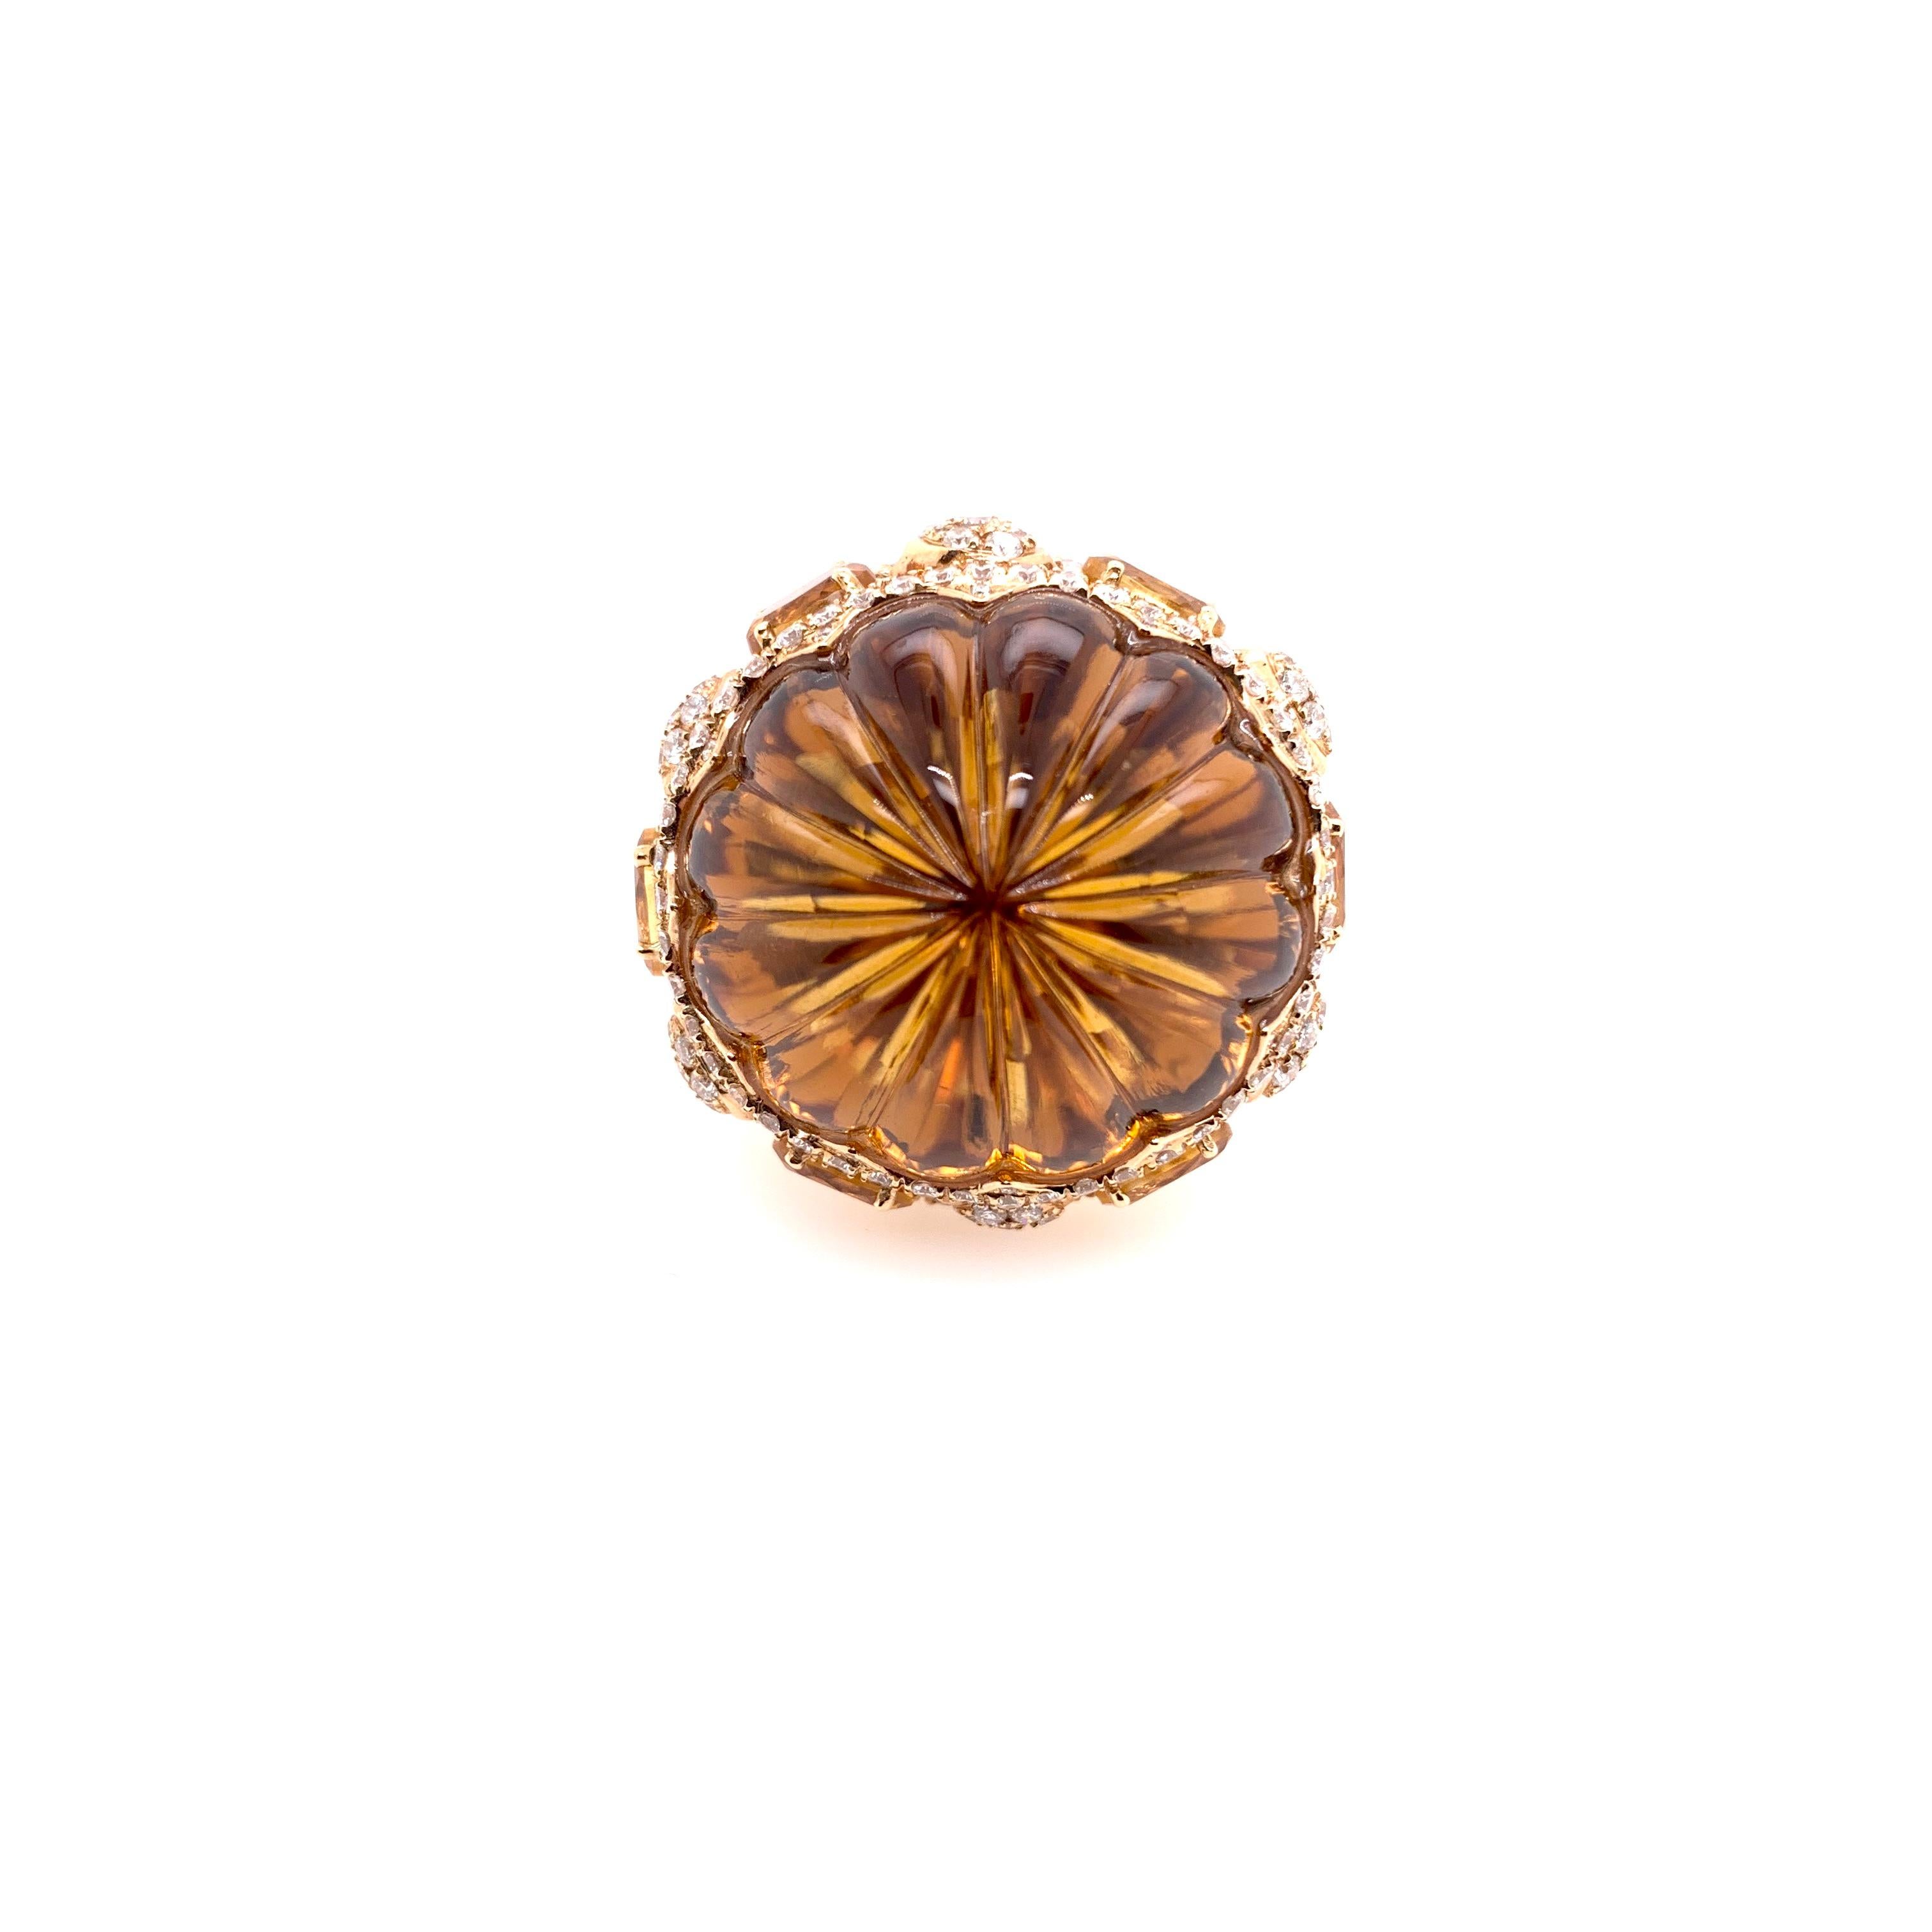 This stunning cabochon citrine sits atop of a custom setting surrounded by citrine and diamonds along the equator.  Set in 18k yellow gold, this unique citrine attracts all eyes as its profile commands authority and attention!  The citrines add up